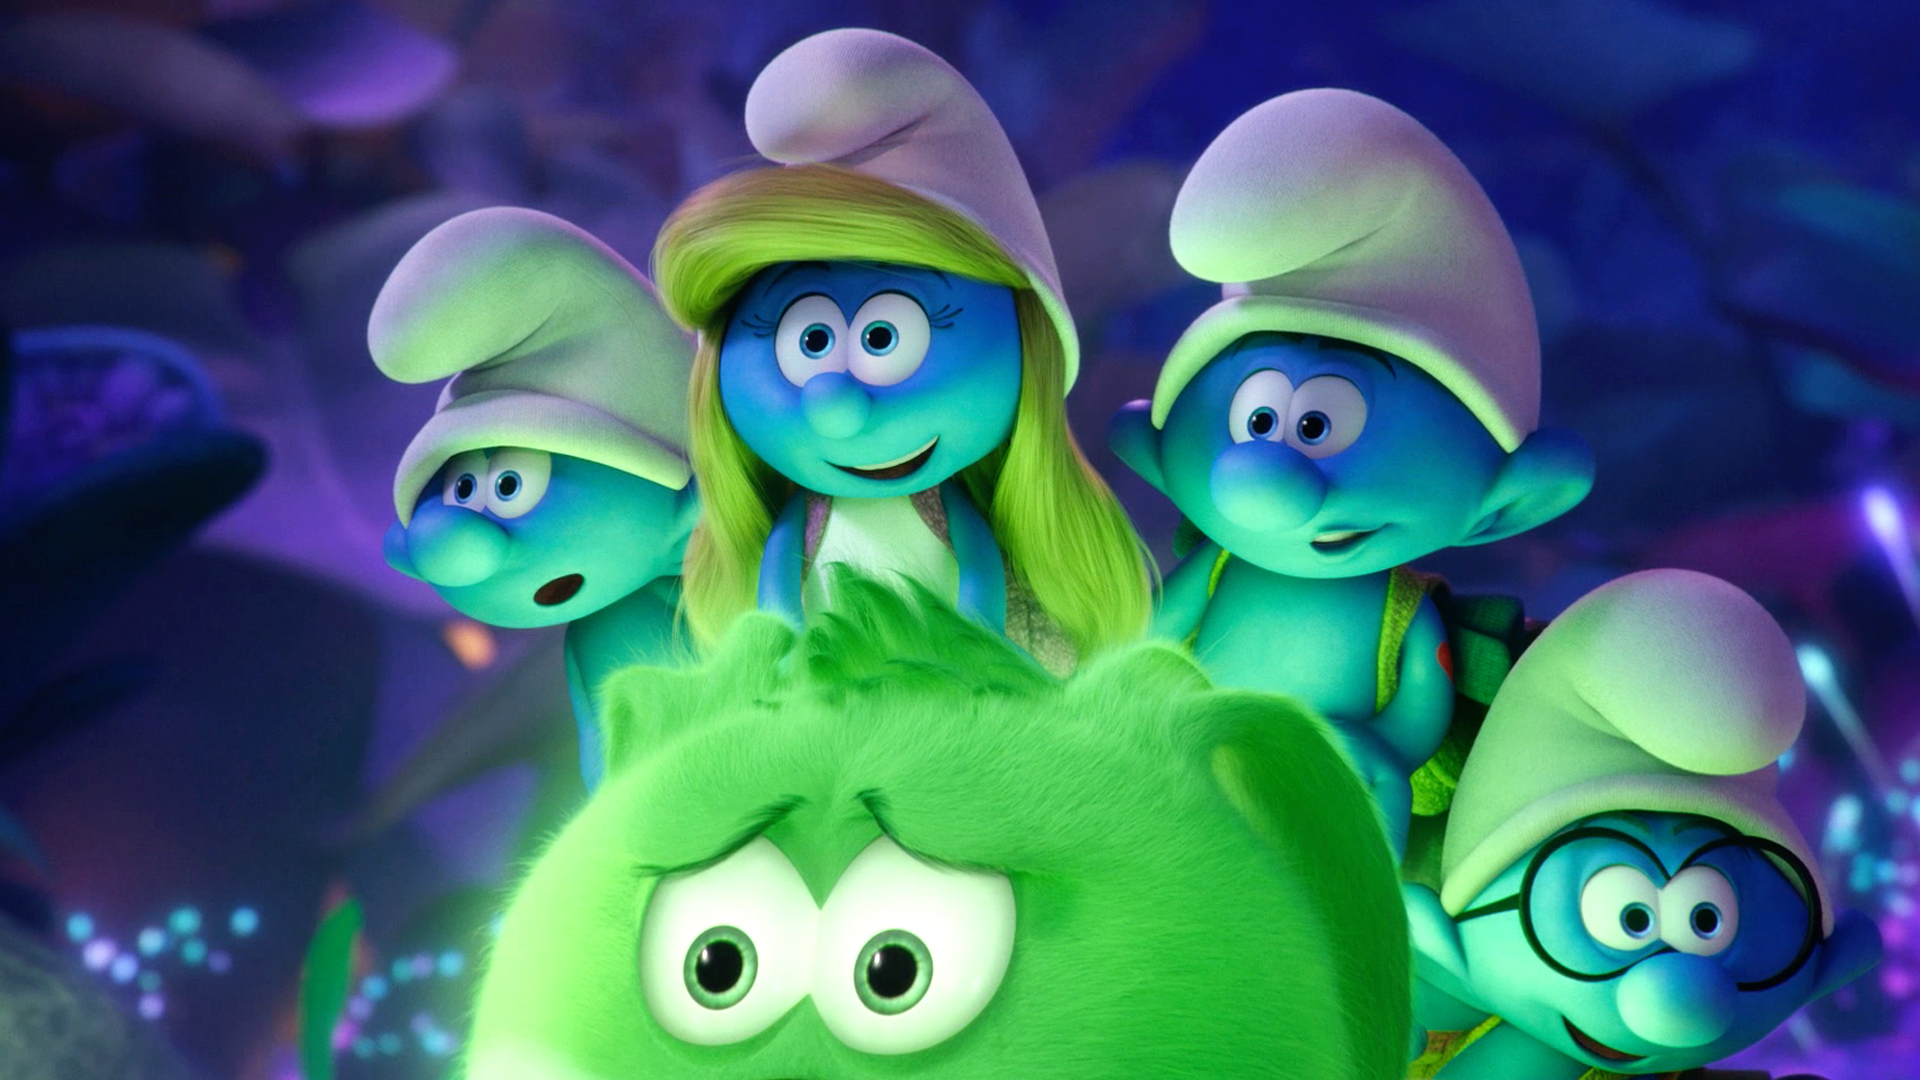 Smurfs: The Lost Village' asks: What's in a name?